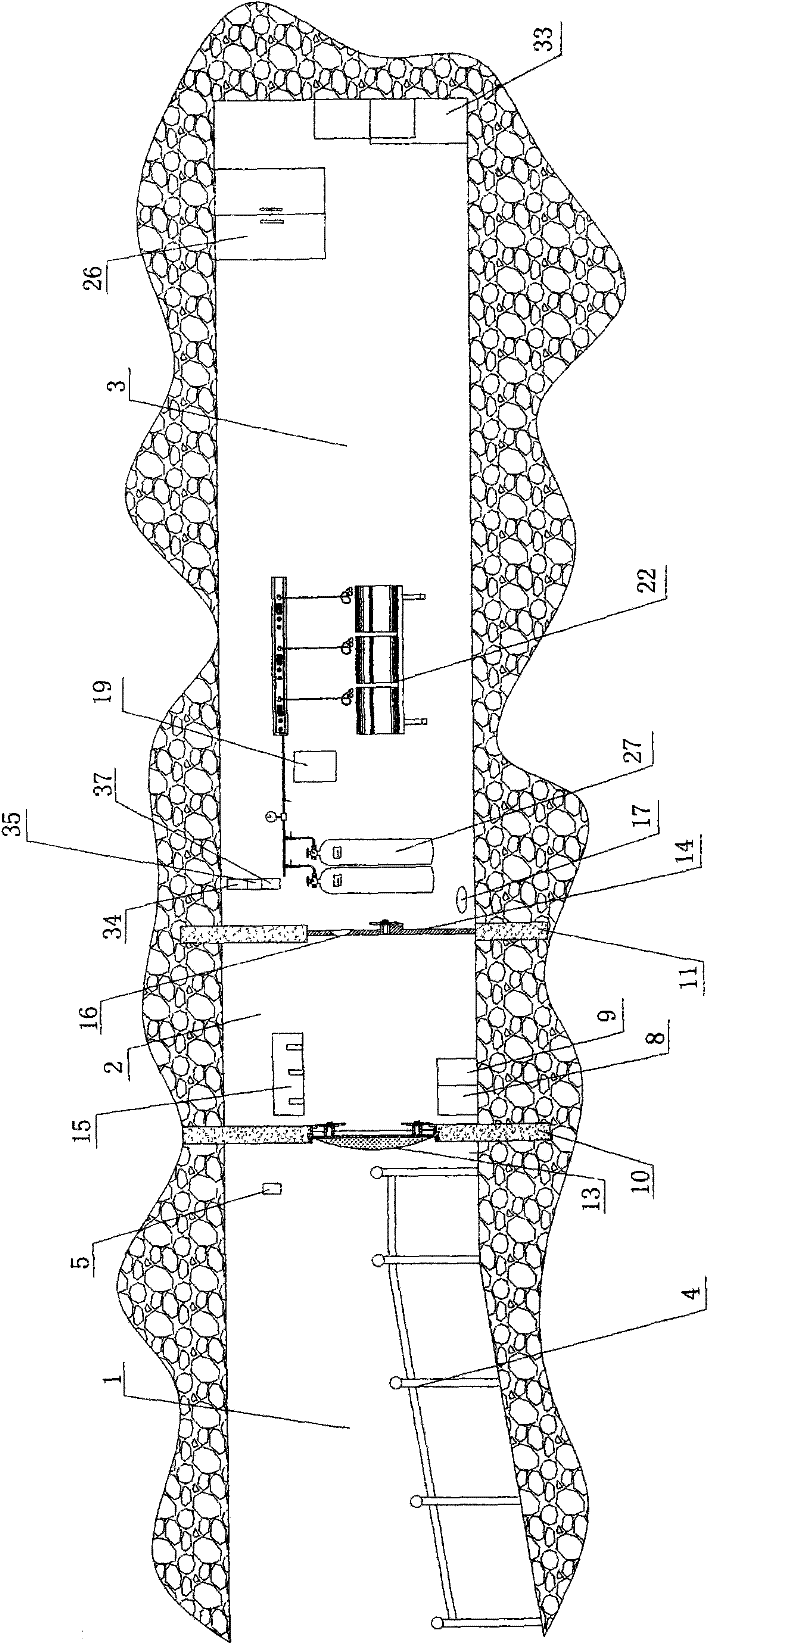 Fixed shelter with double-protection structure